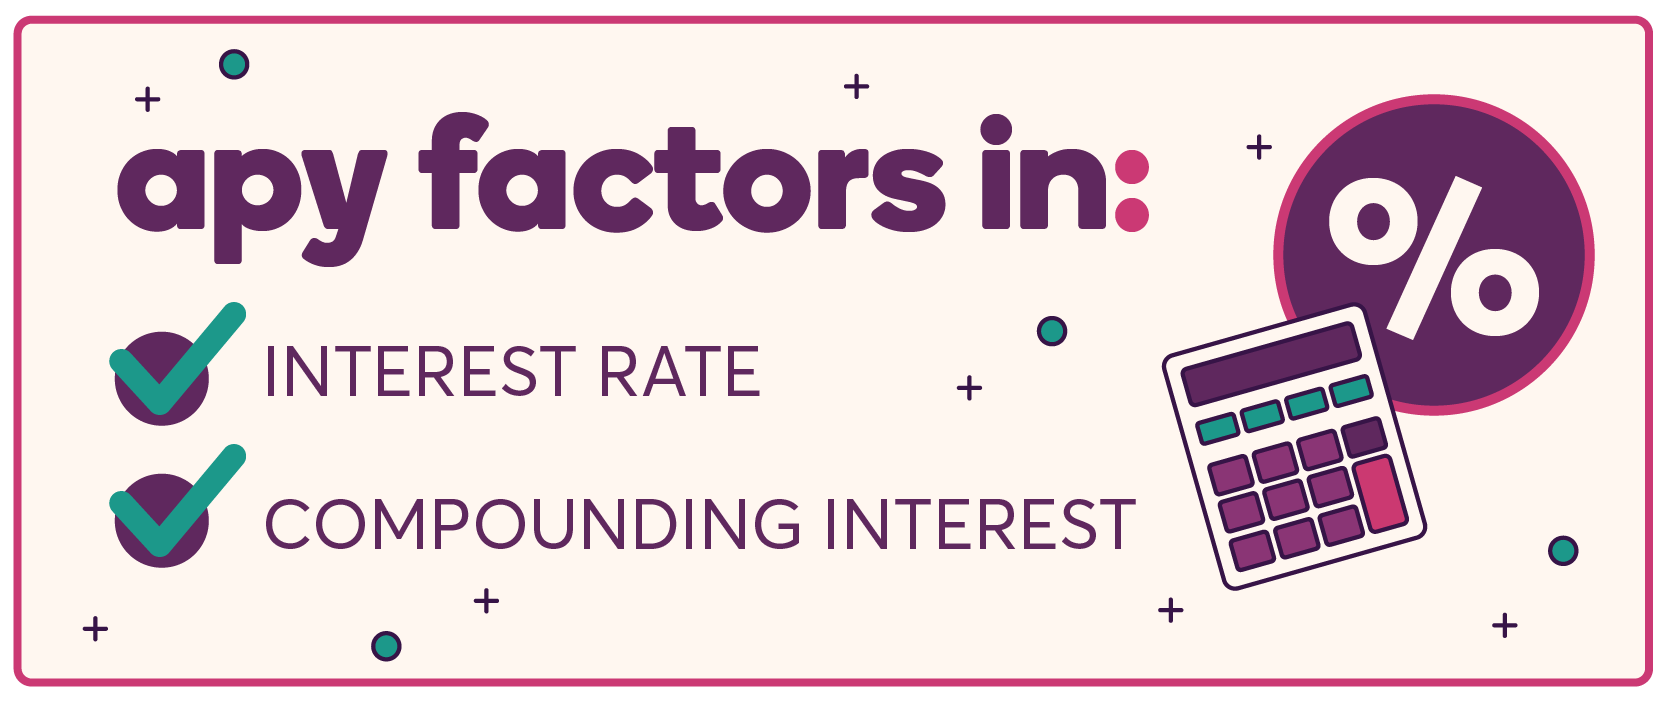 Illustration with text “APY factors in: Interest rate, compounding interest” with illustrations of checkmarks, calculator and percentage sign.